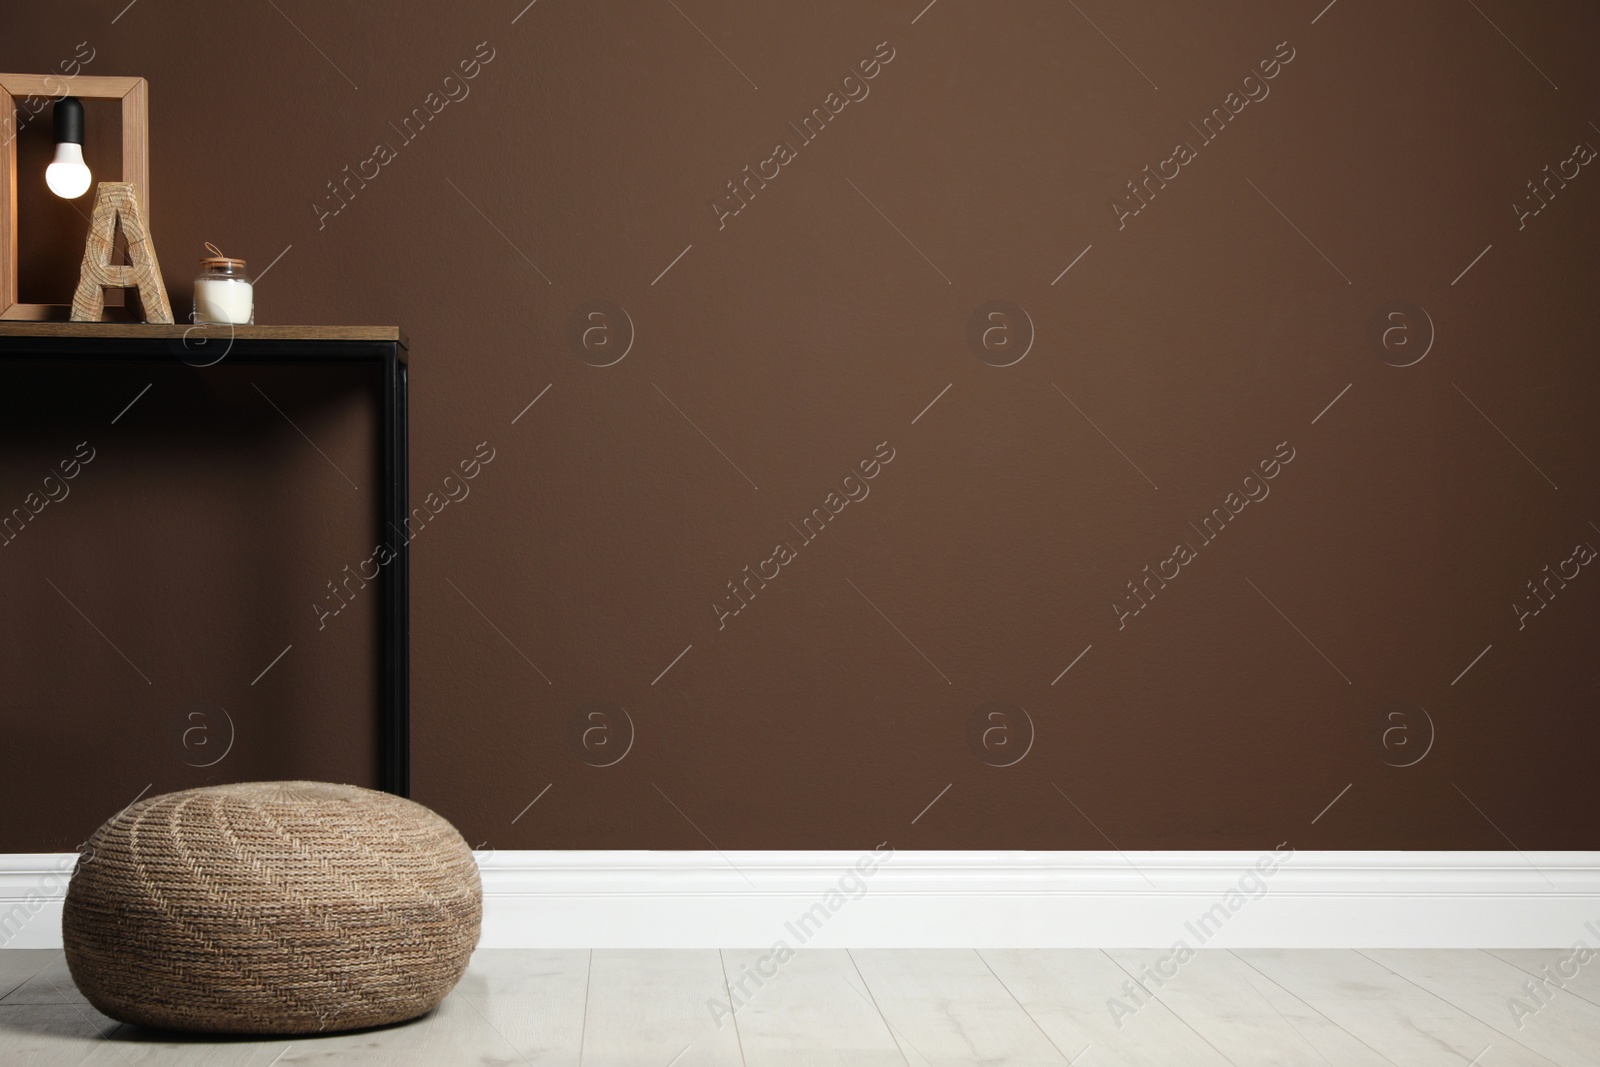 Photo of Comfortable knitted pouf and table with decor elements near brown wall indoors, space for text. Interior design